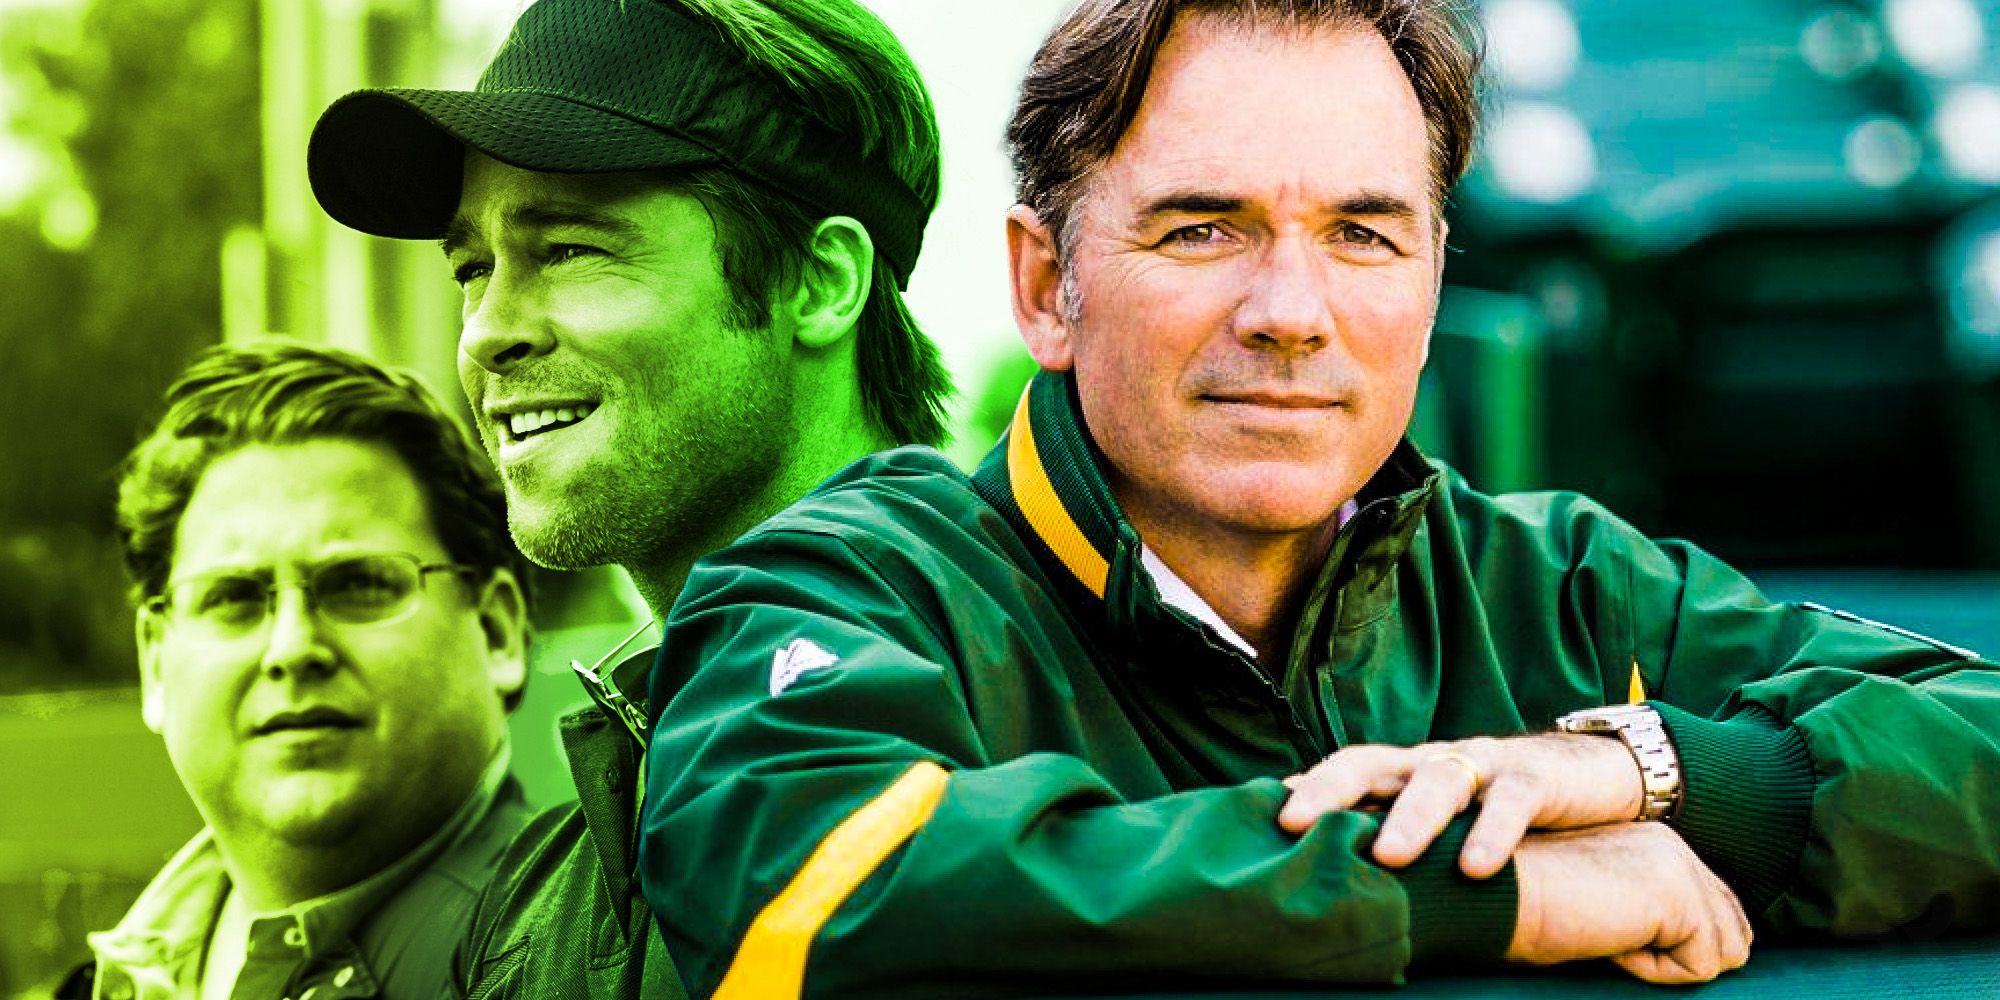 A's GM Billy Beane joins former Yankee in bringing Moneyball to Dutch  soccer team